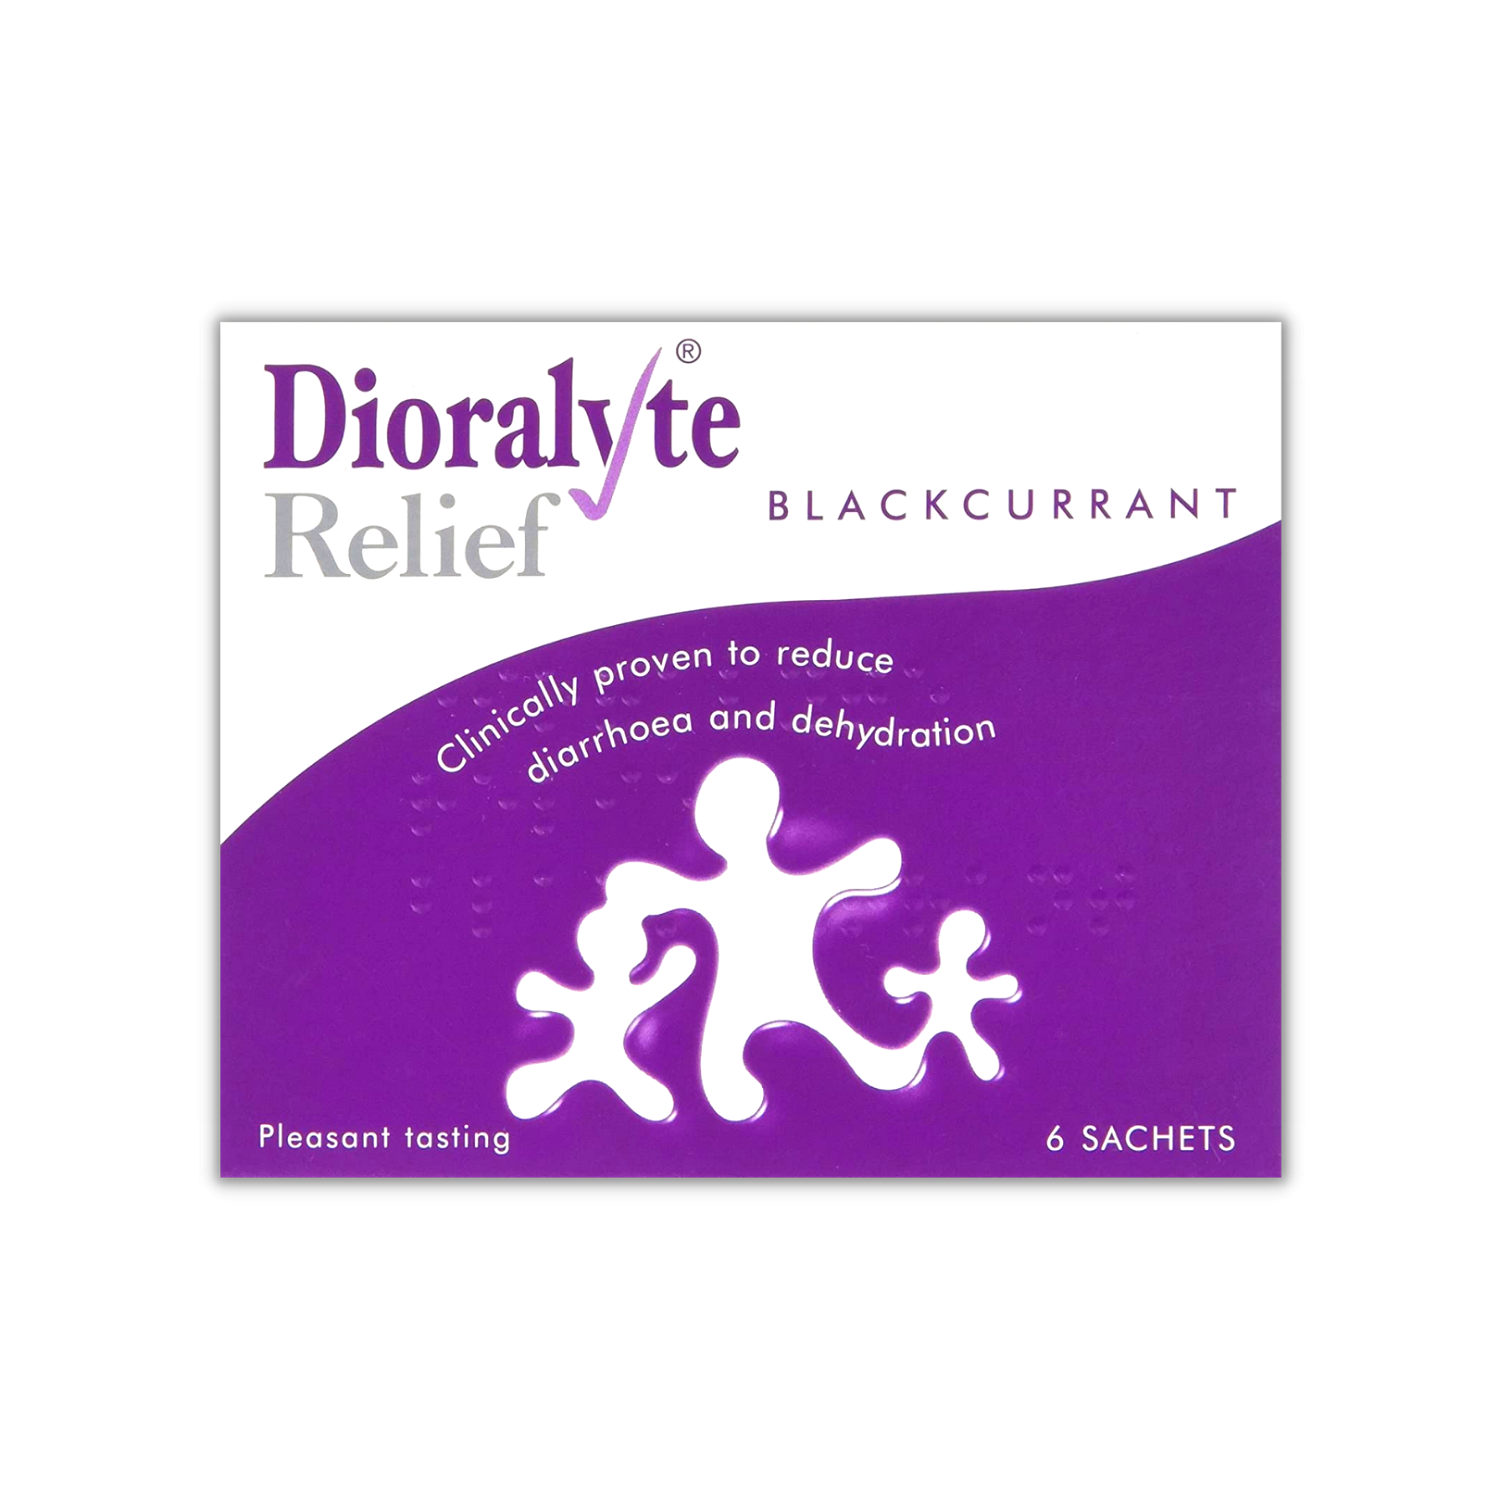 Dioralyte Relief Blackcurrent 6 Sachets